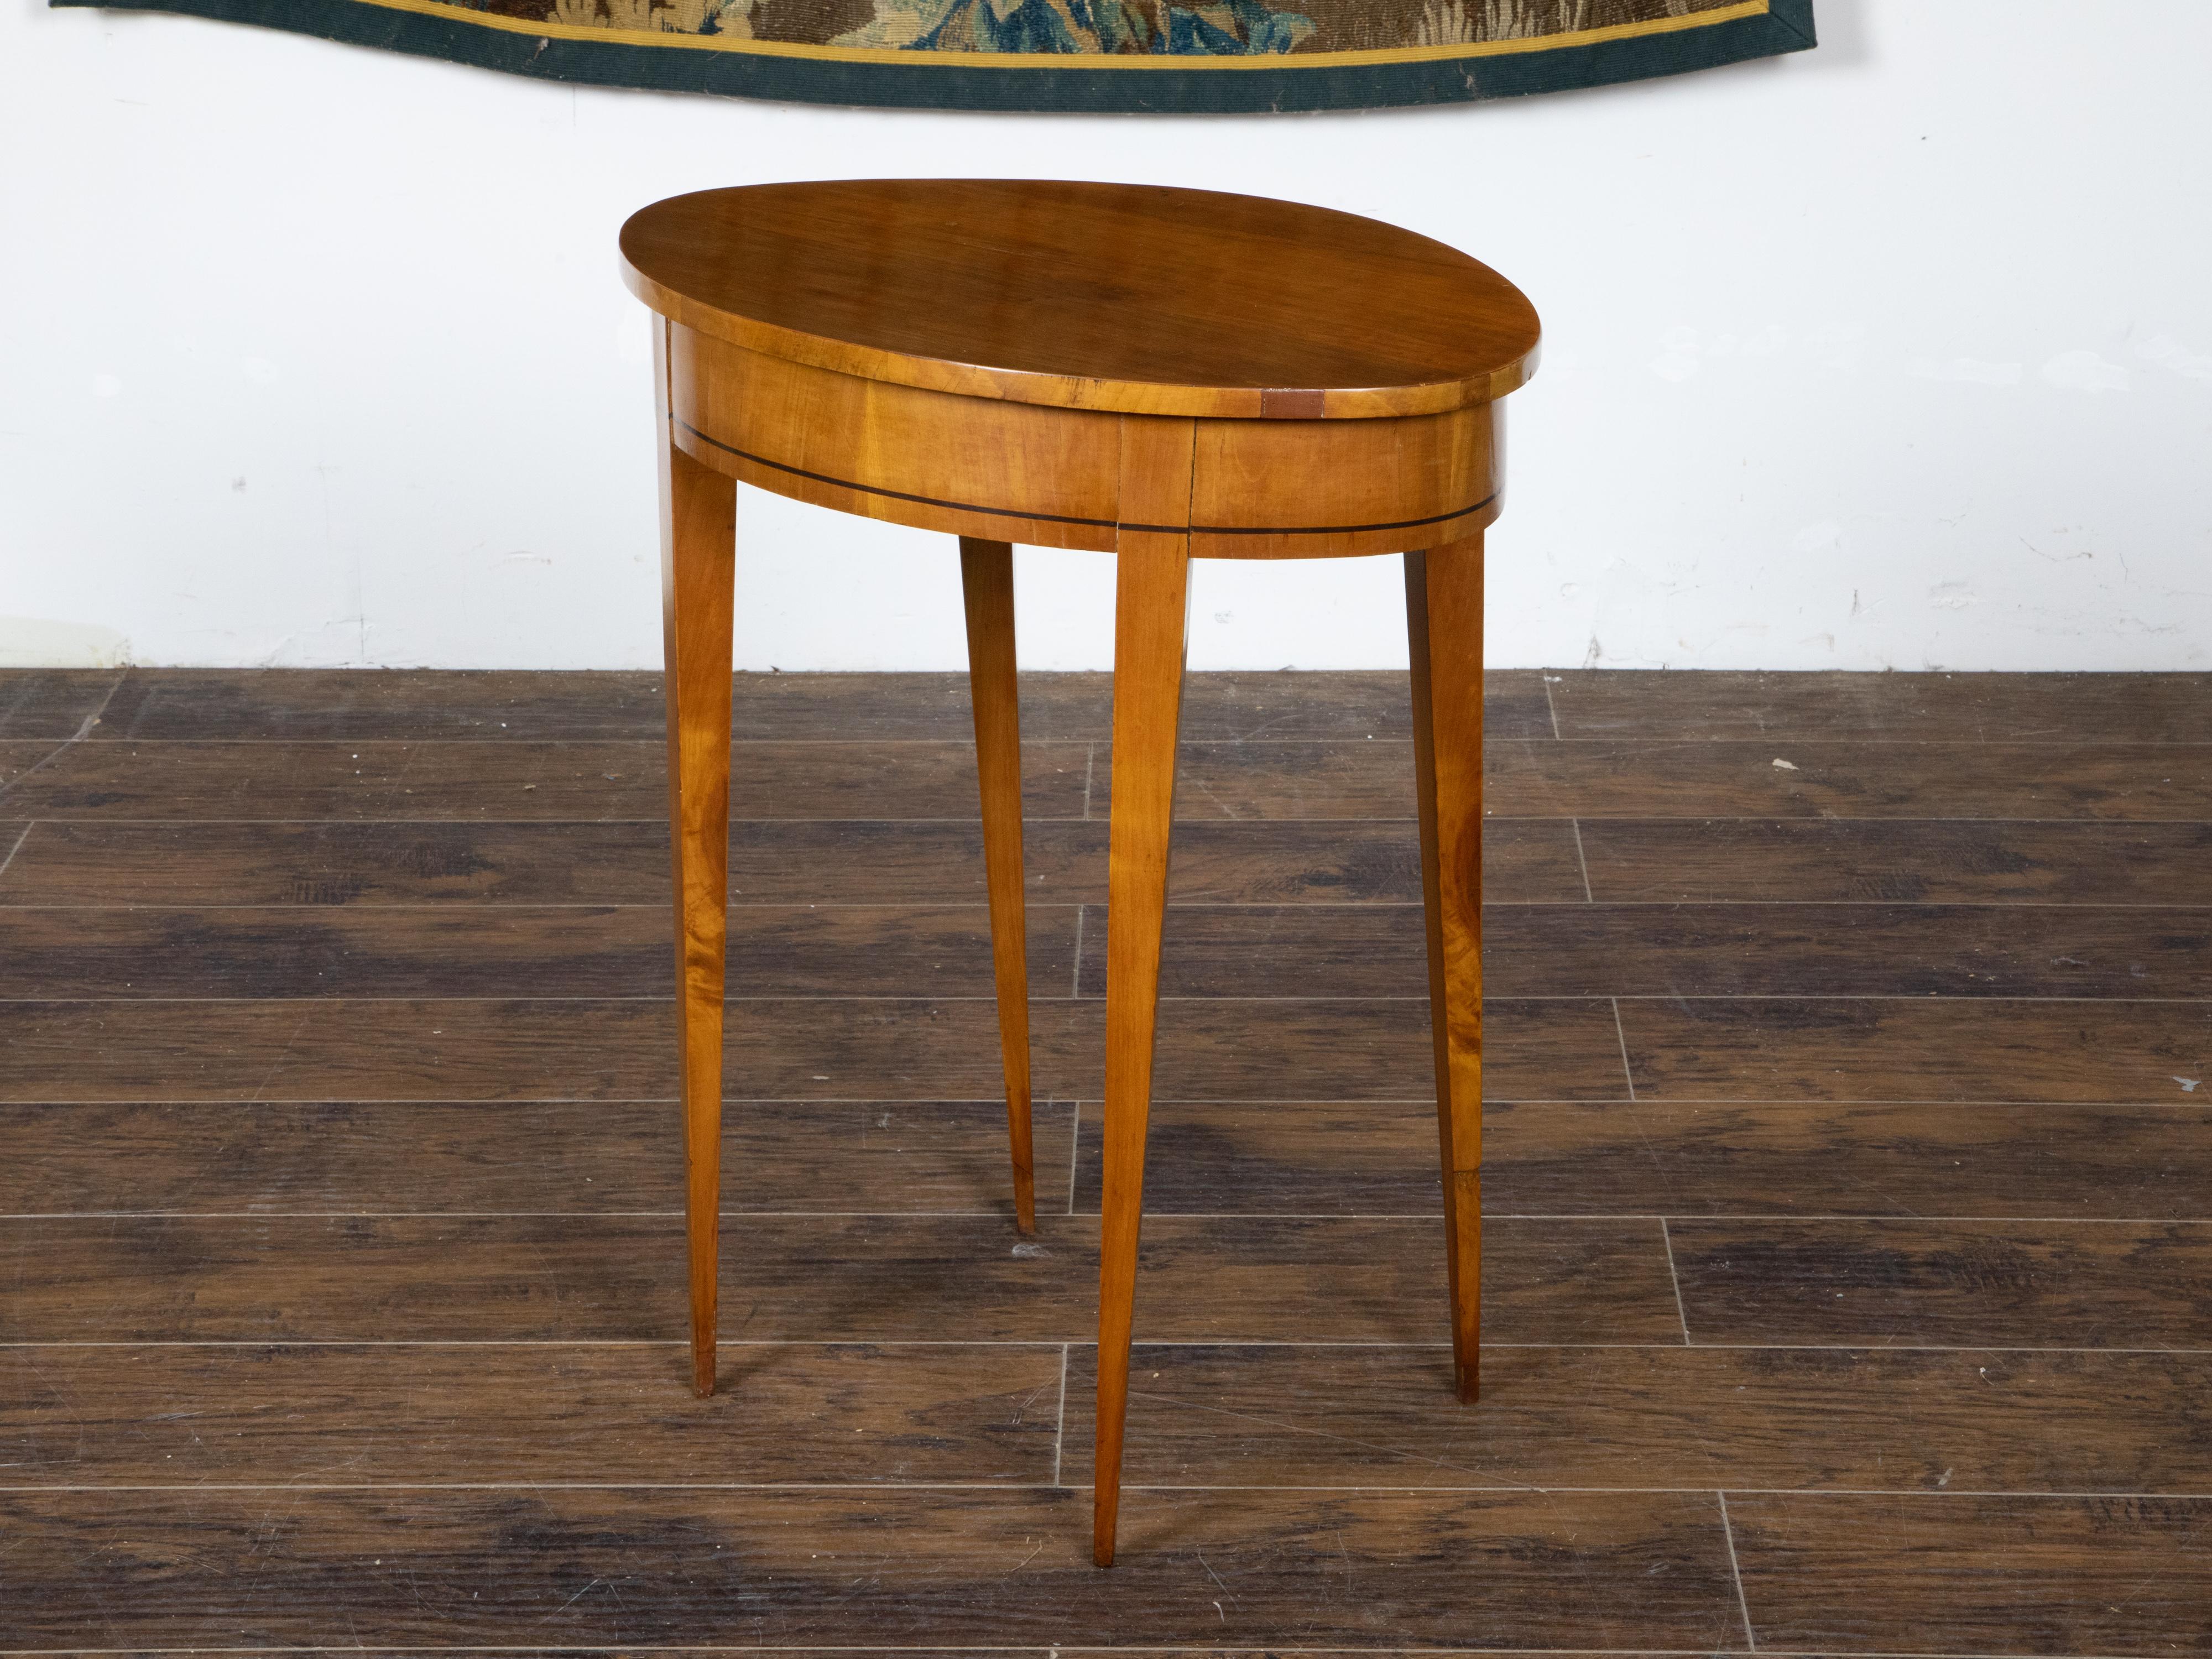 French Neoclassical Style 19th Century Walnut Table with Oval Top, Tapered Legs For Sale 5